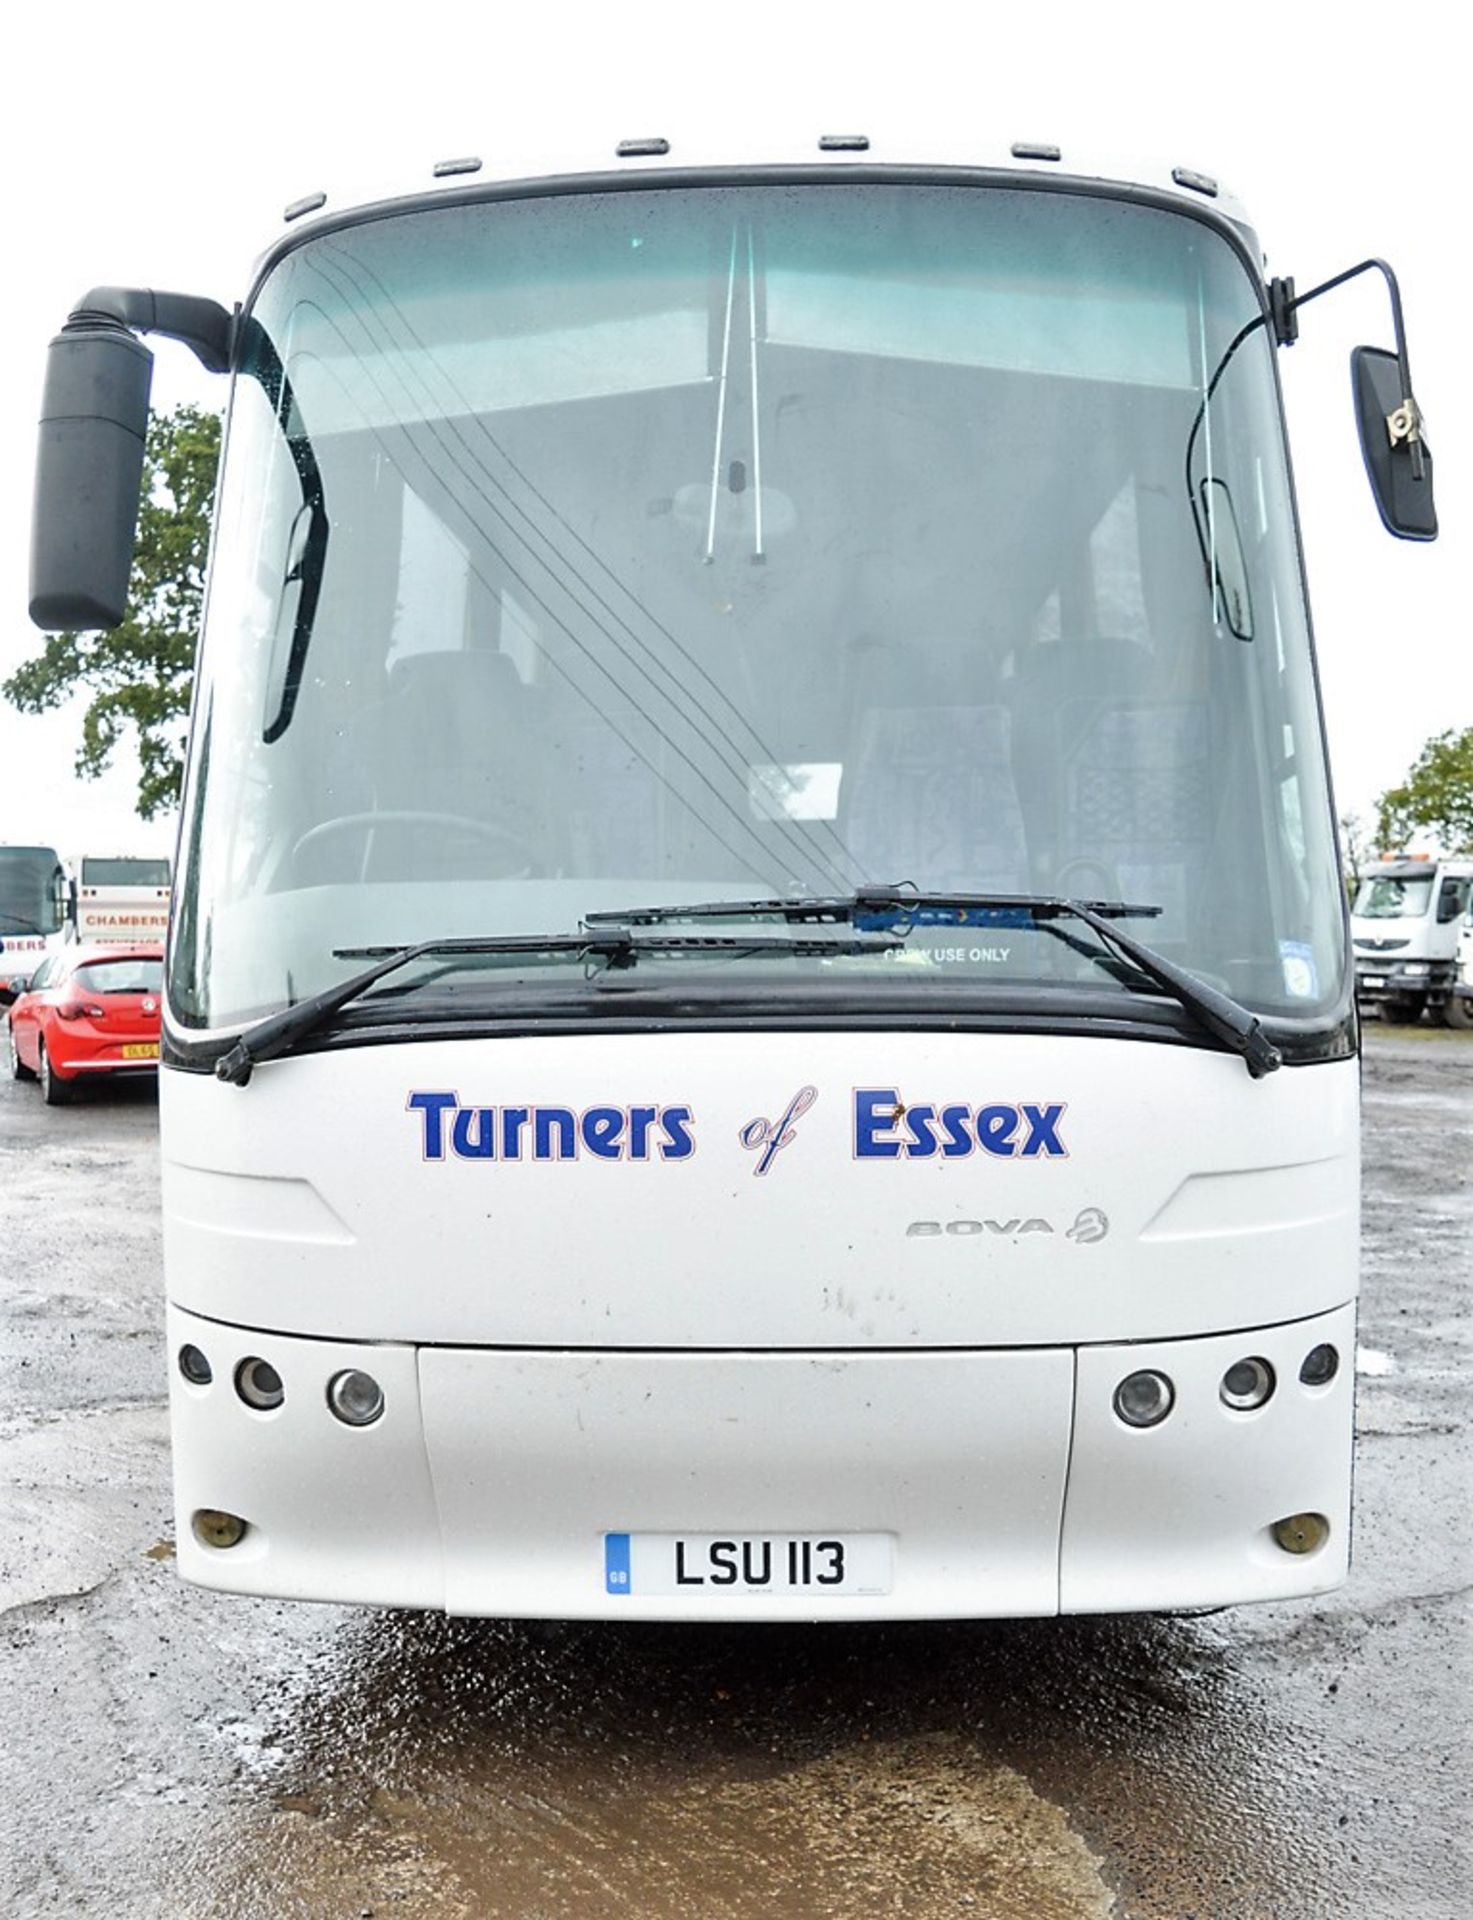 Bova Futura FH 55 seat luxury coach Registration Number: LSU 113 (Retained. The coach will be - Image 5 of 17